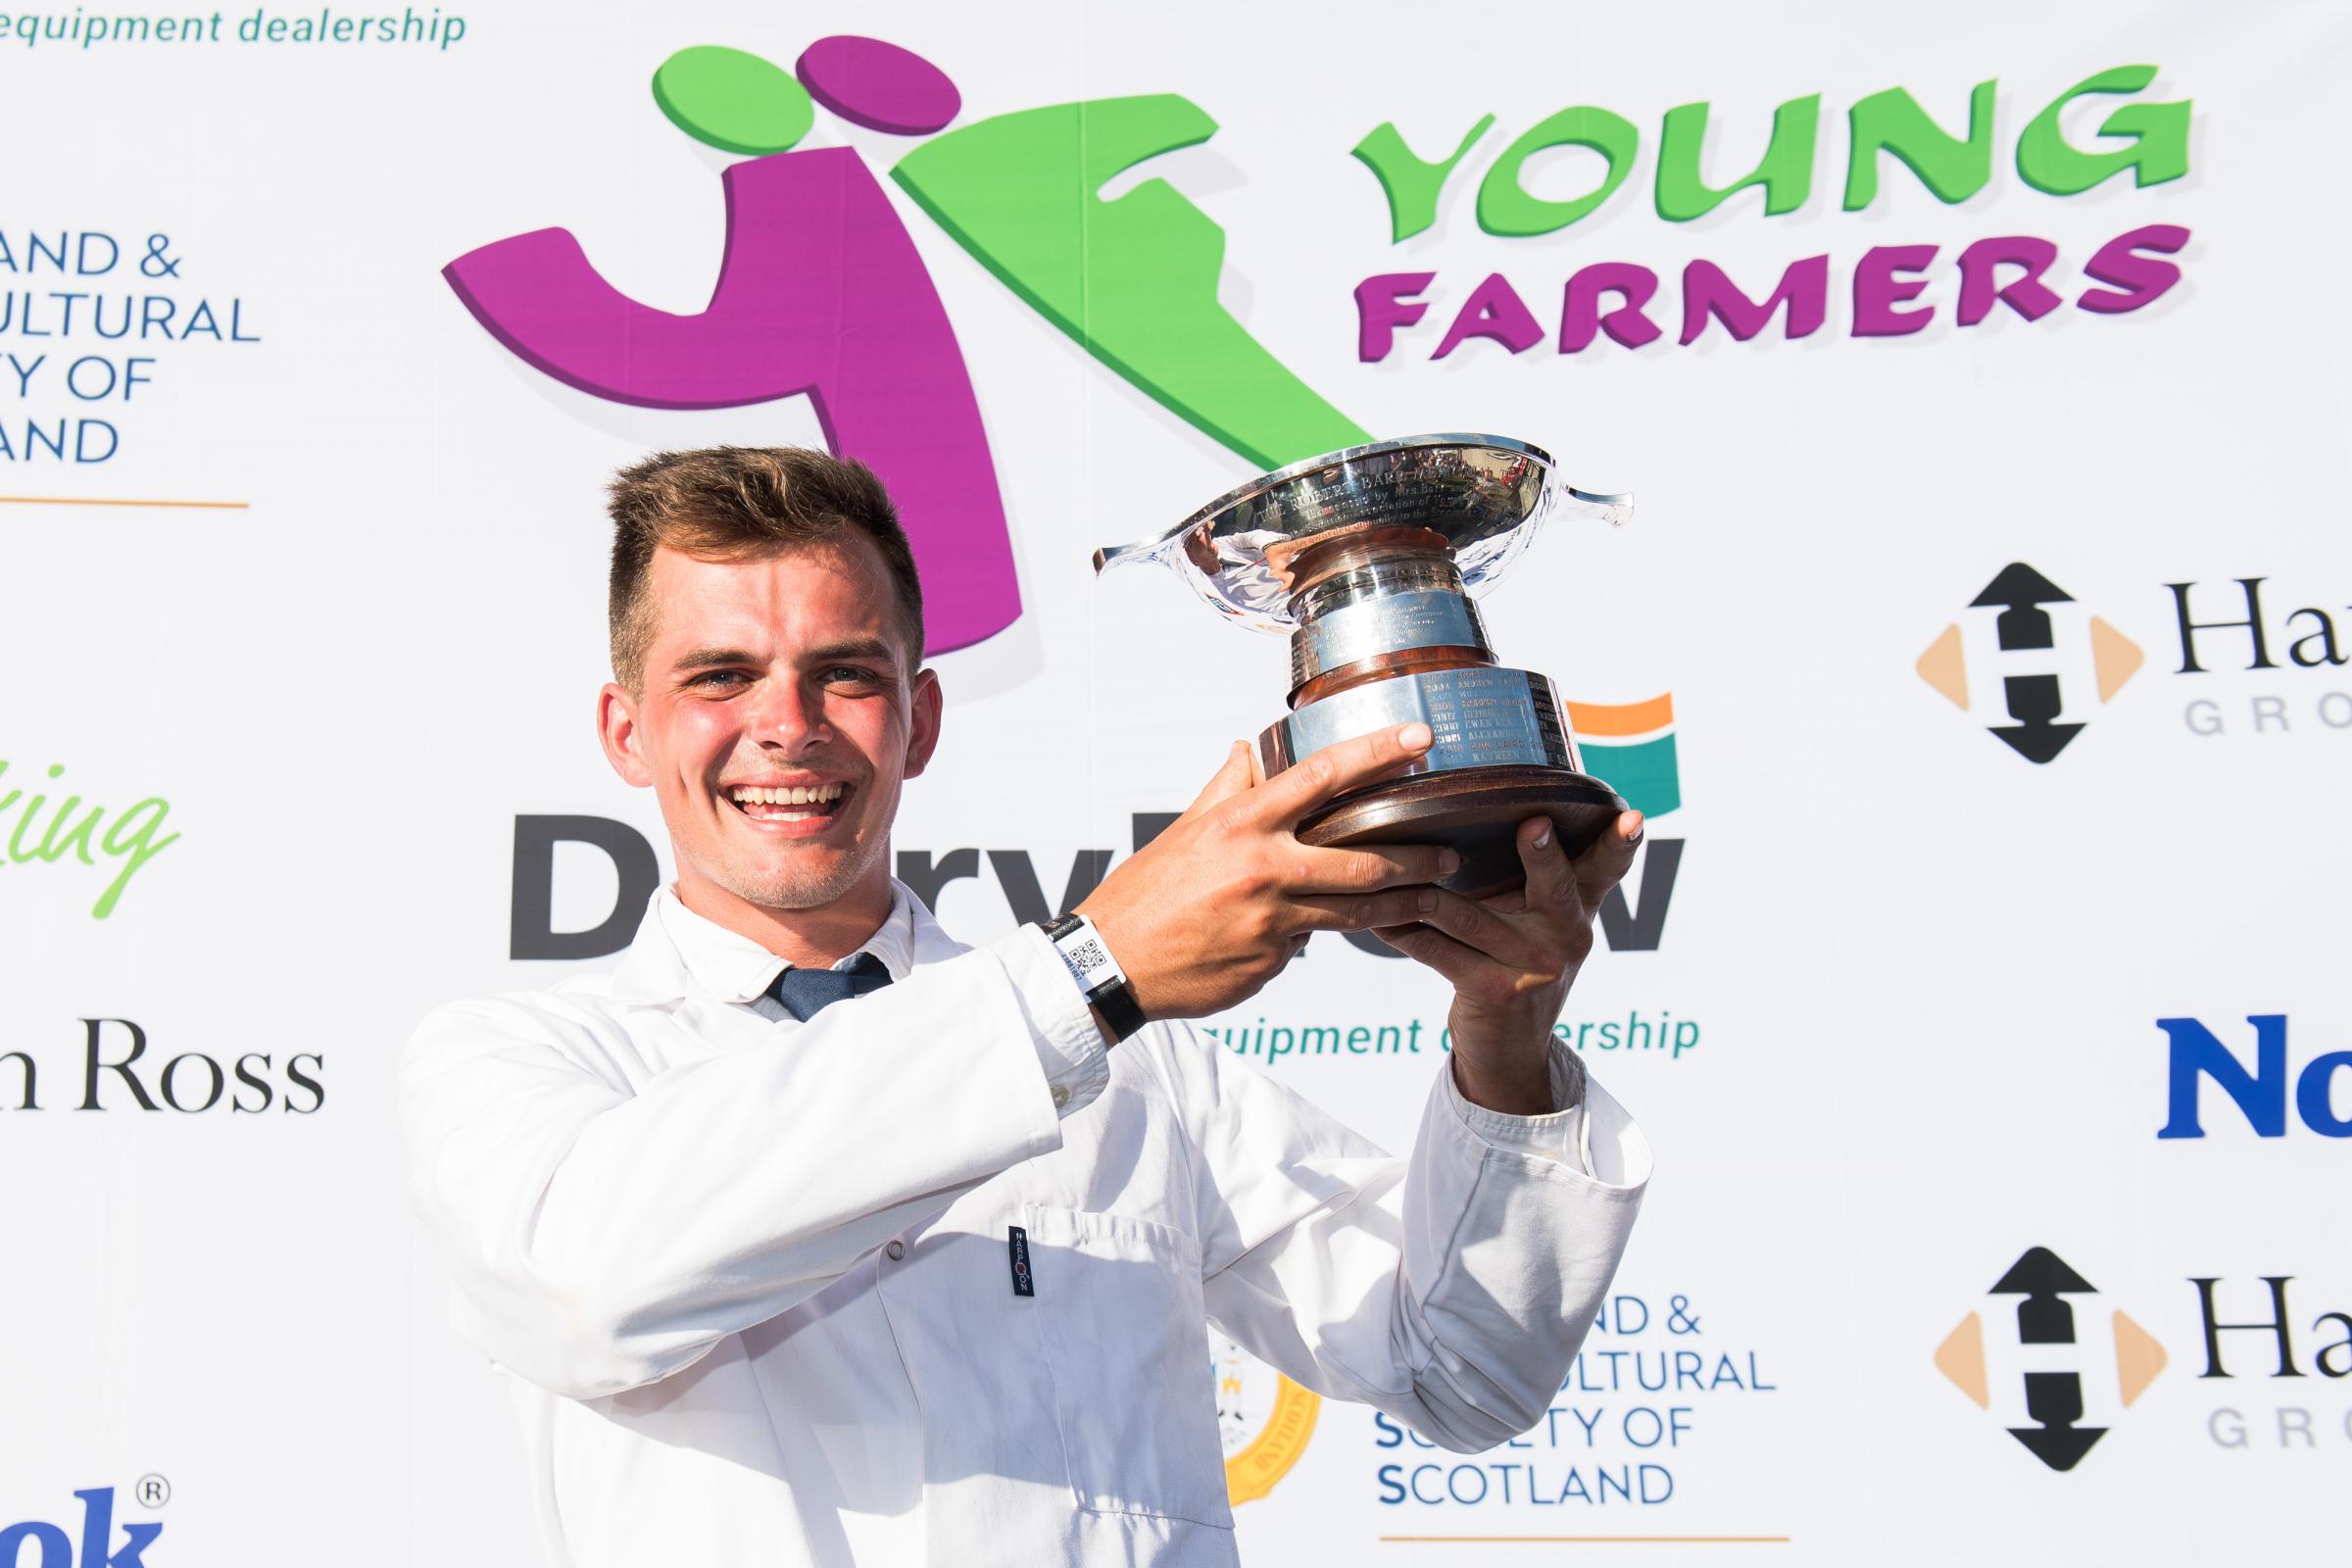 Stockman of the year title when to James Hamilton from Lanarkshire Ref:RH240623151 Rob Haining / The Scottish Farmer...